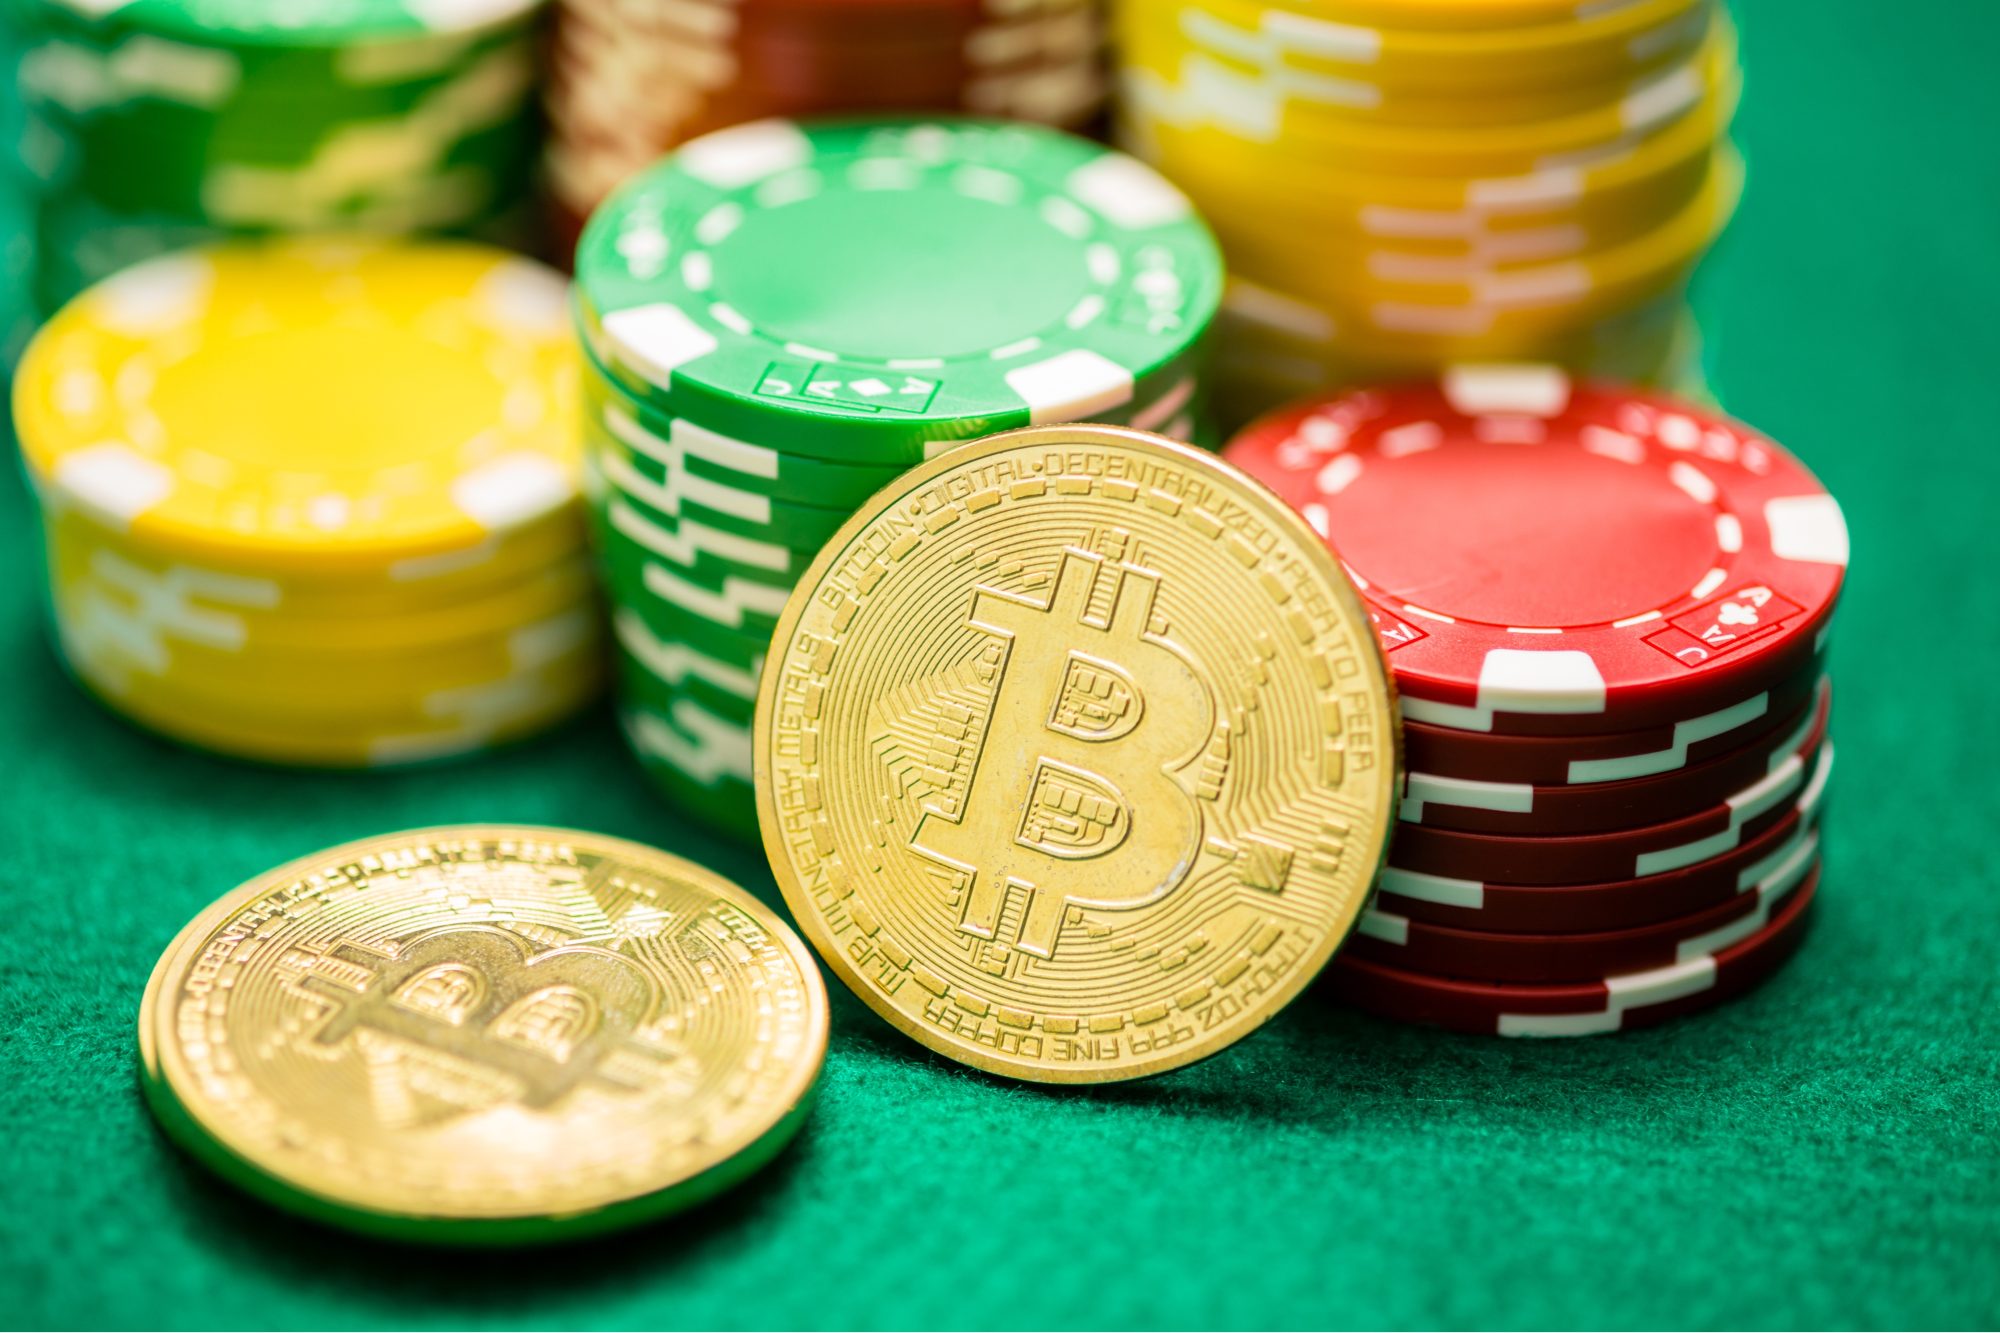 Picture of 2 bitcoins with the stack of casino chips in the background.